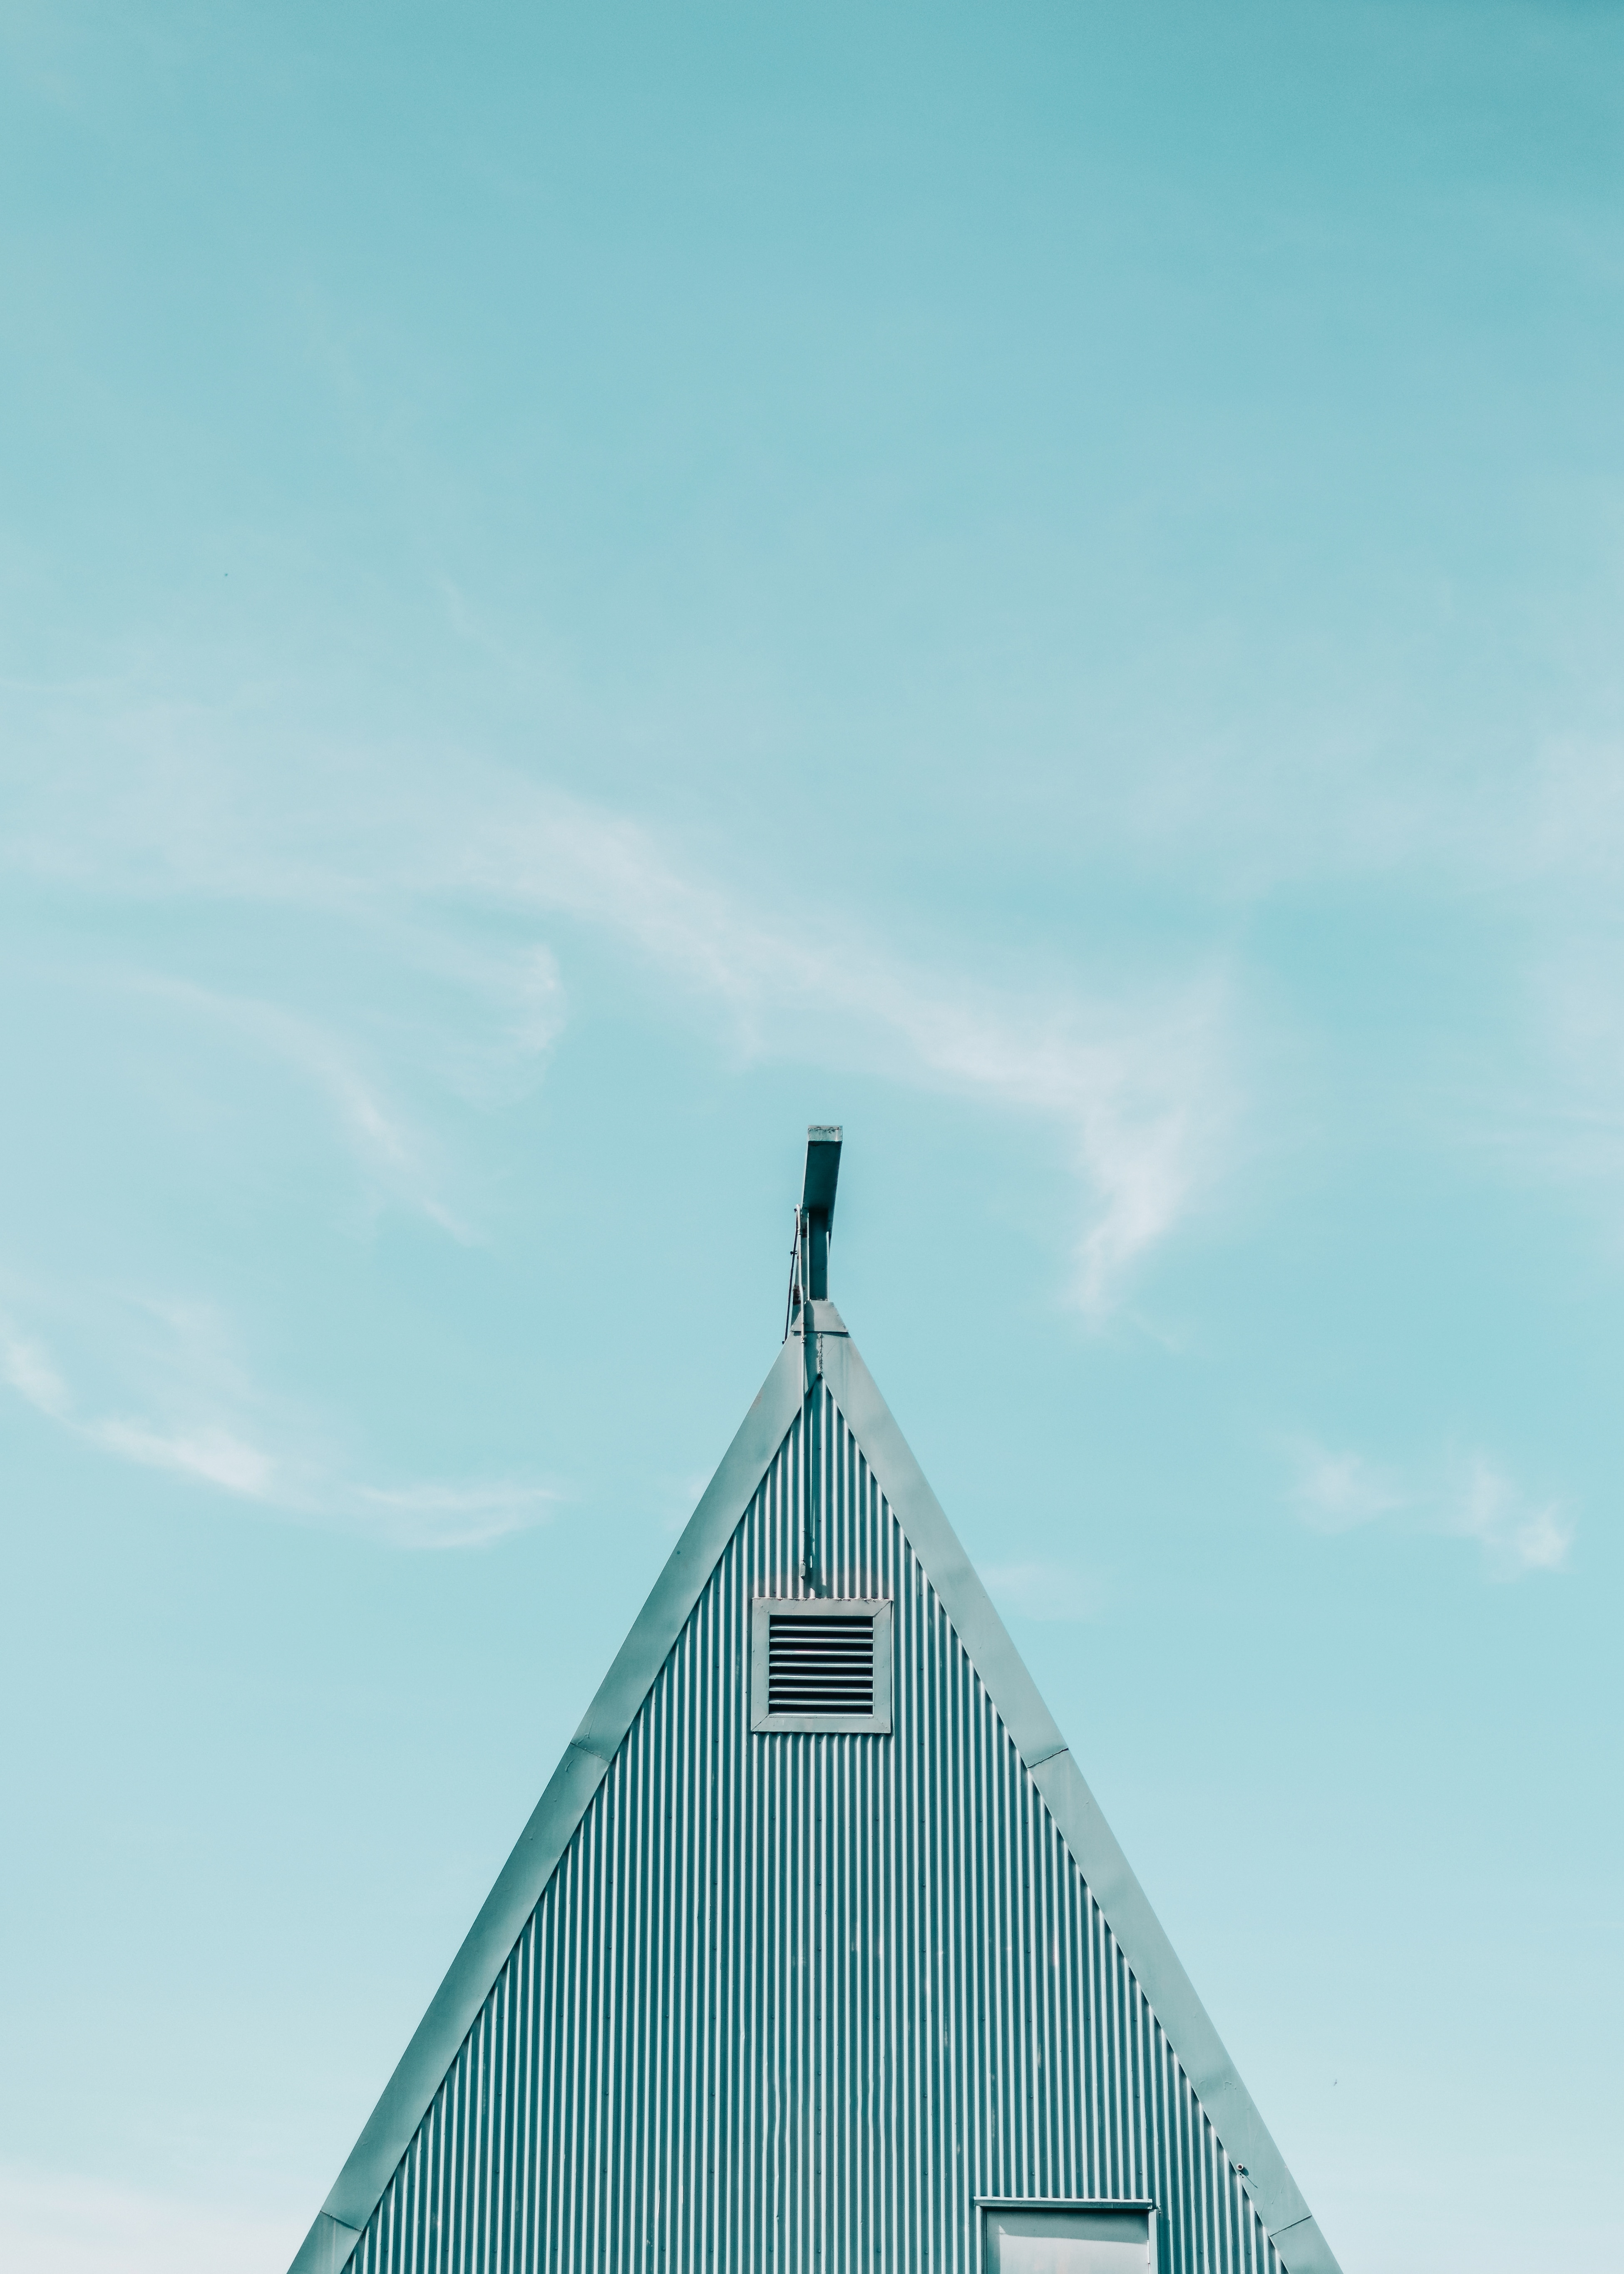 photography of triangular roofing of a house